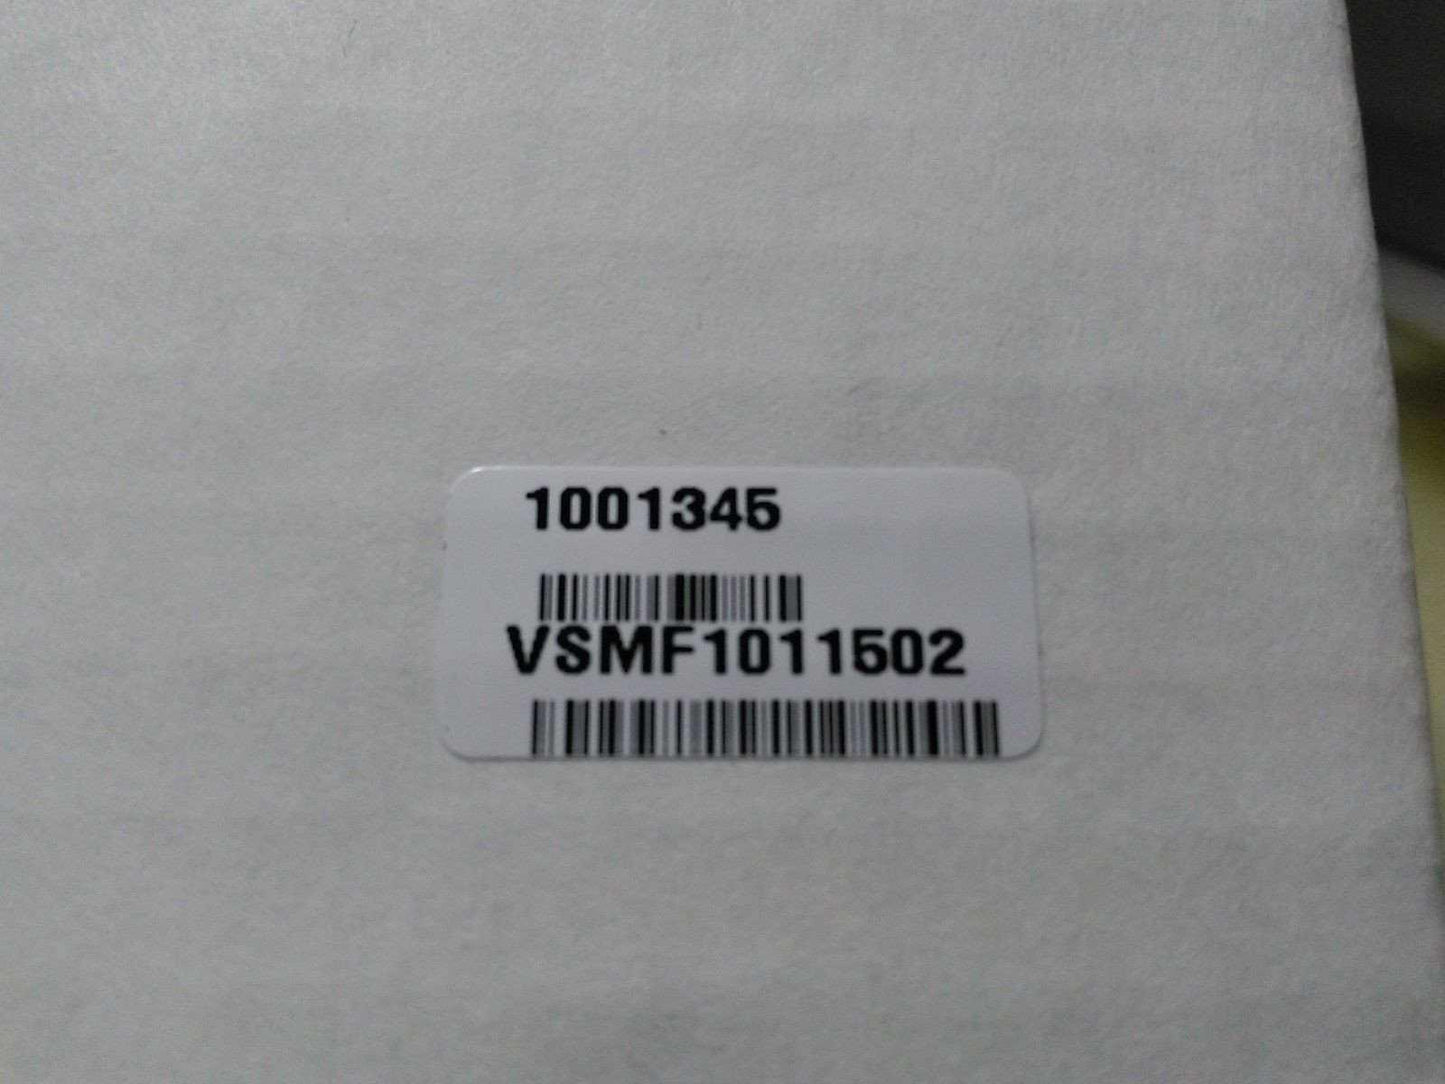 NEW VGA Controller PCB VSMF 1001345 1011502 Warranty FREE Shipping - MBR Medicals